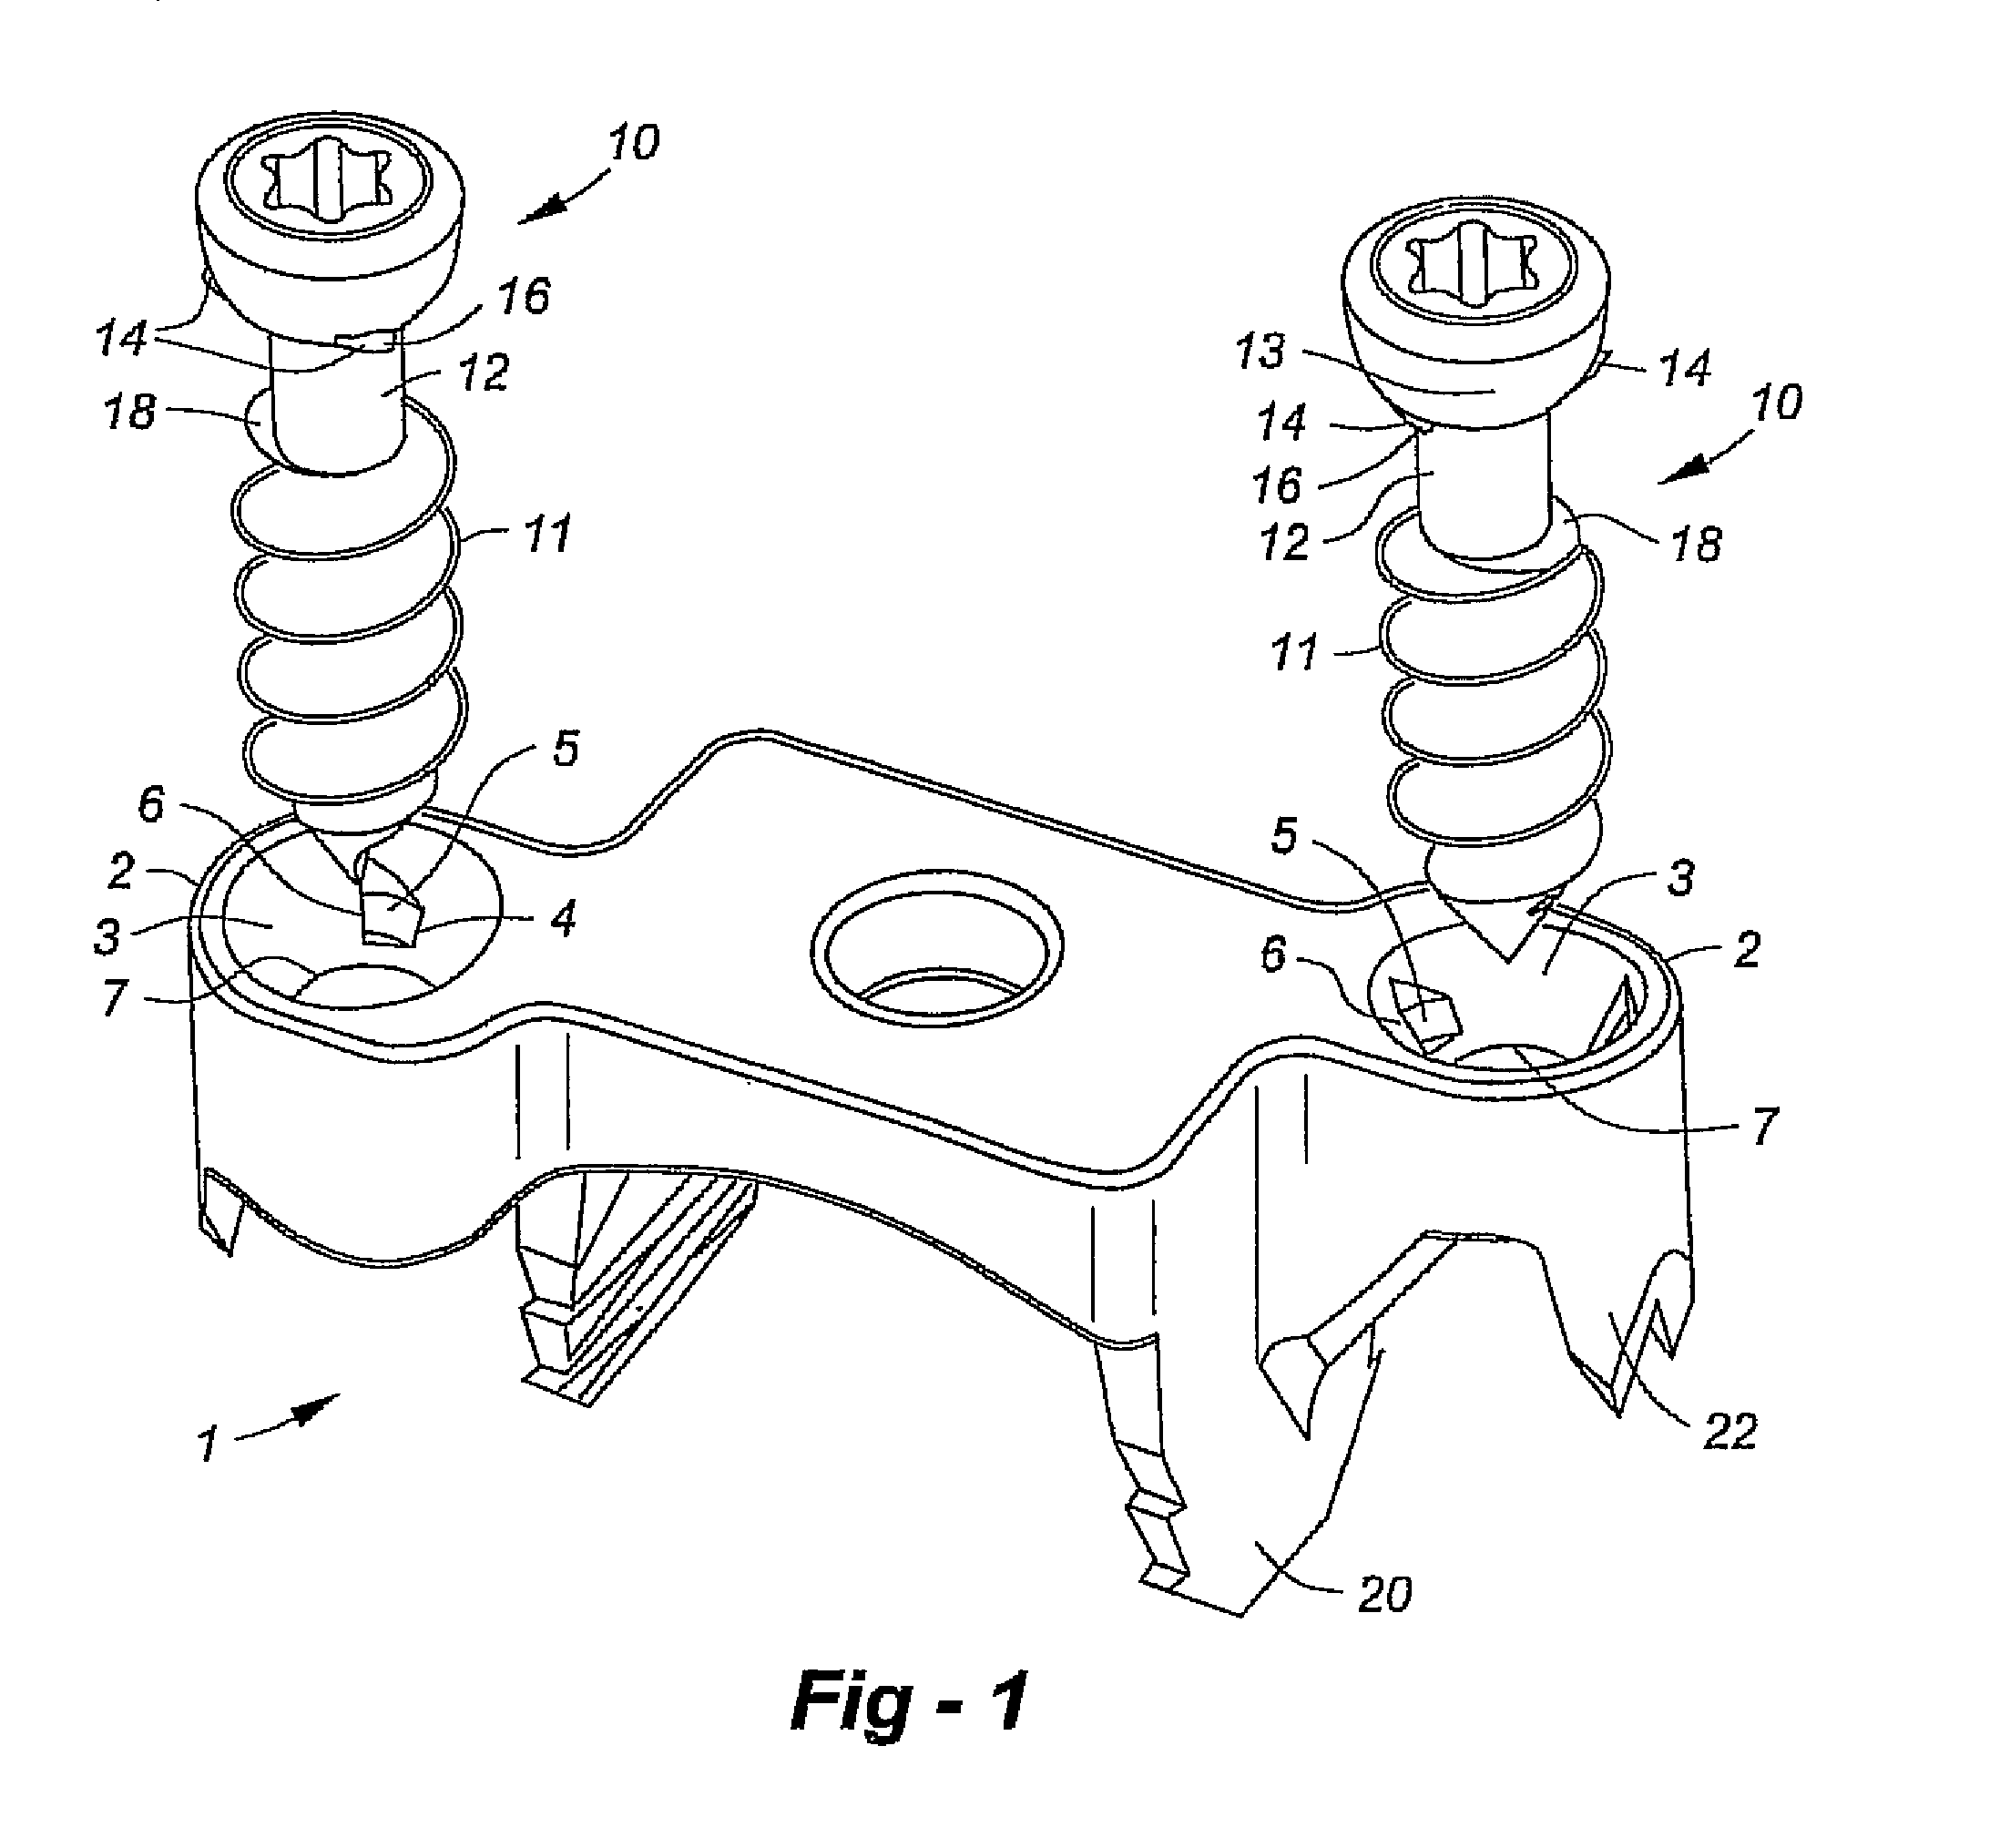 Implant with integral fastener retention